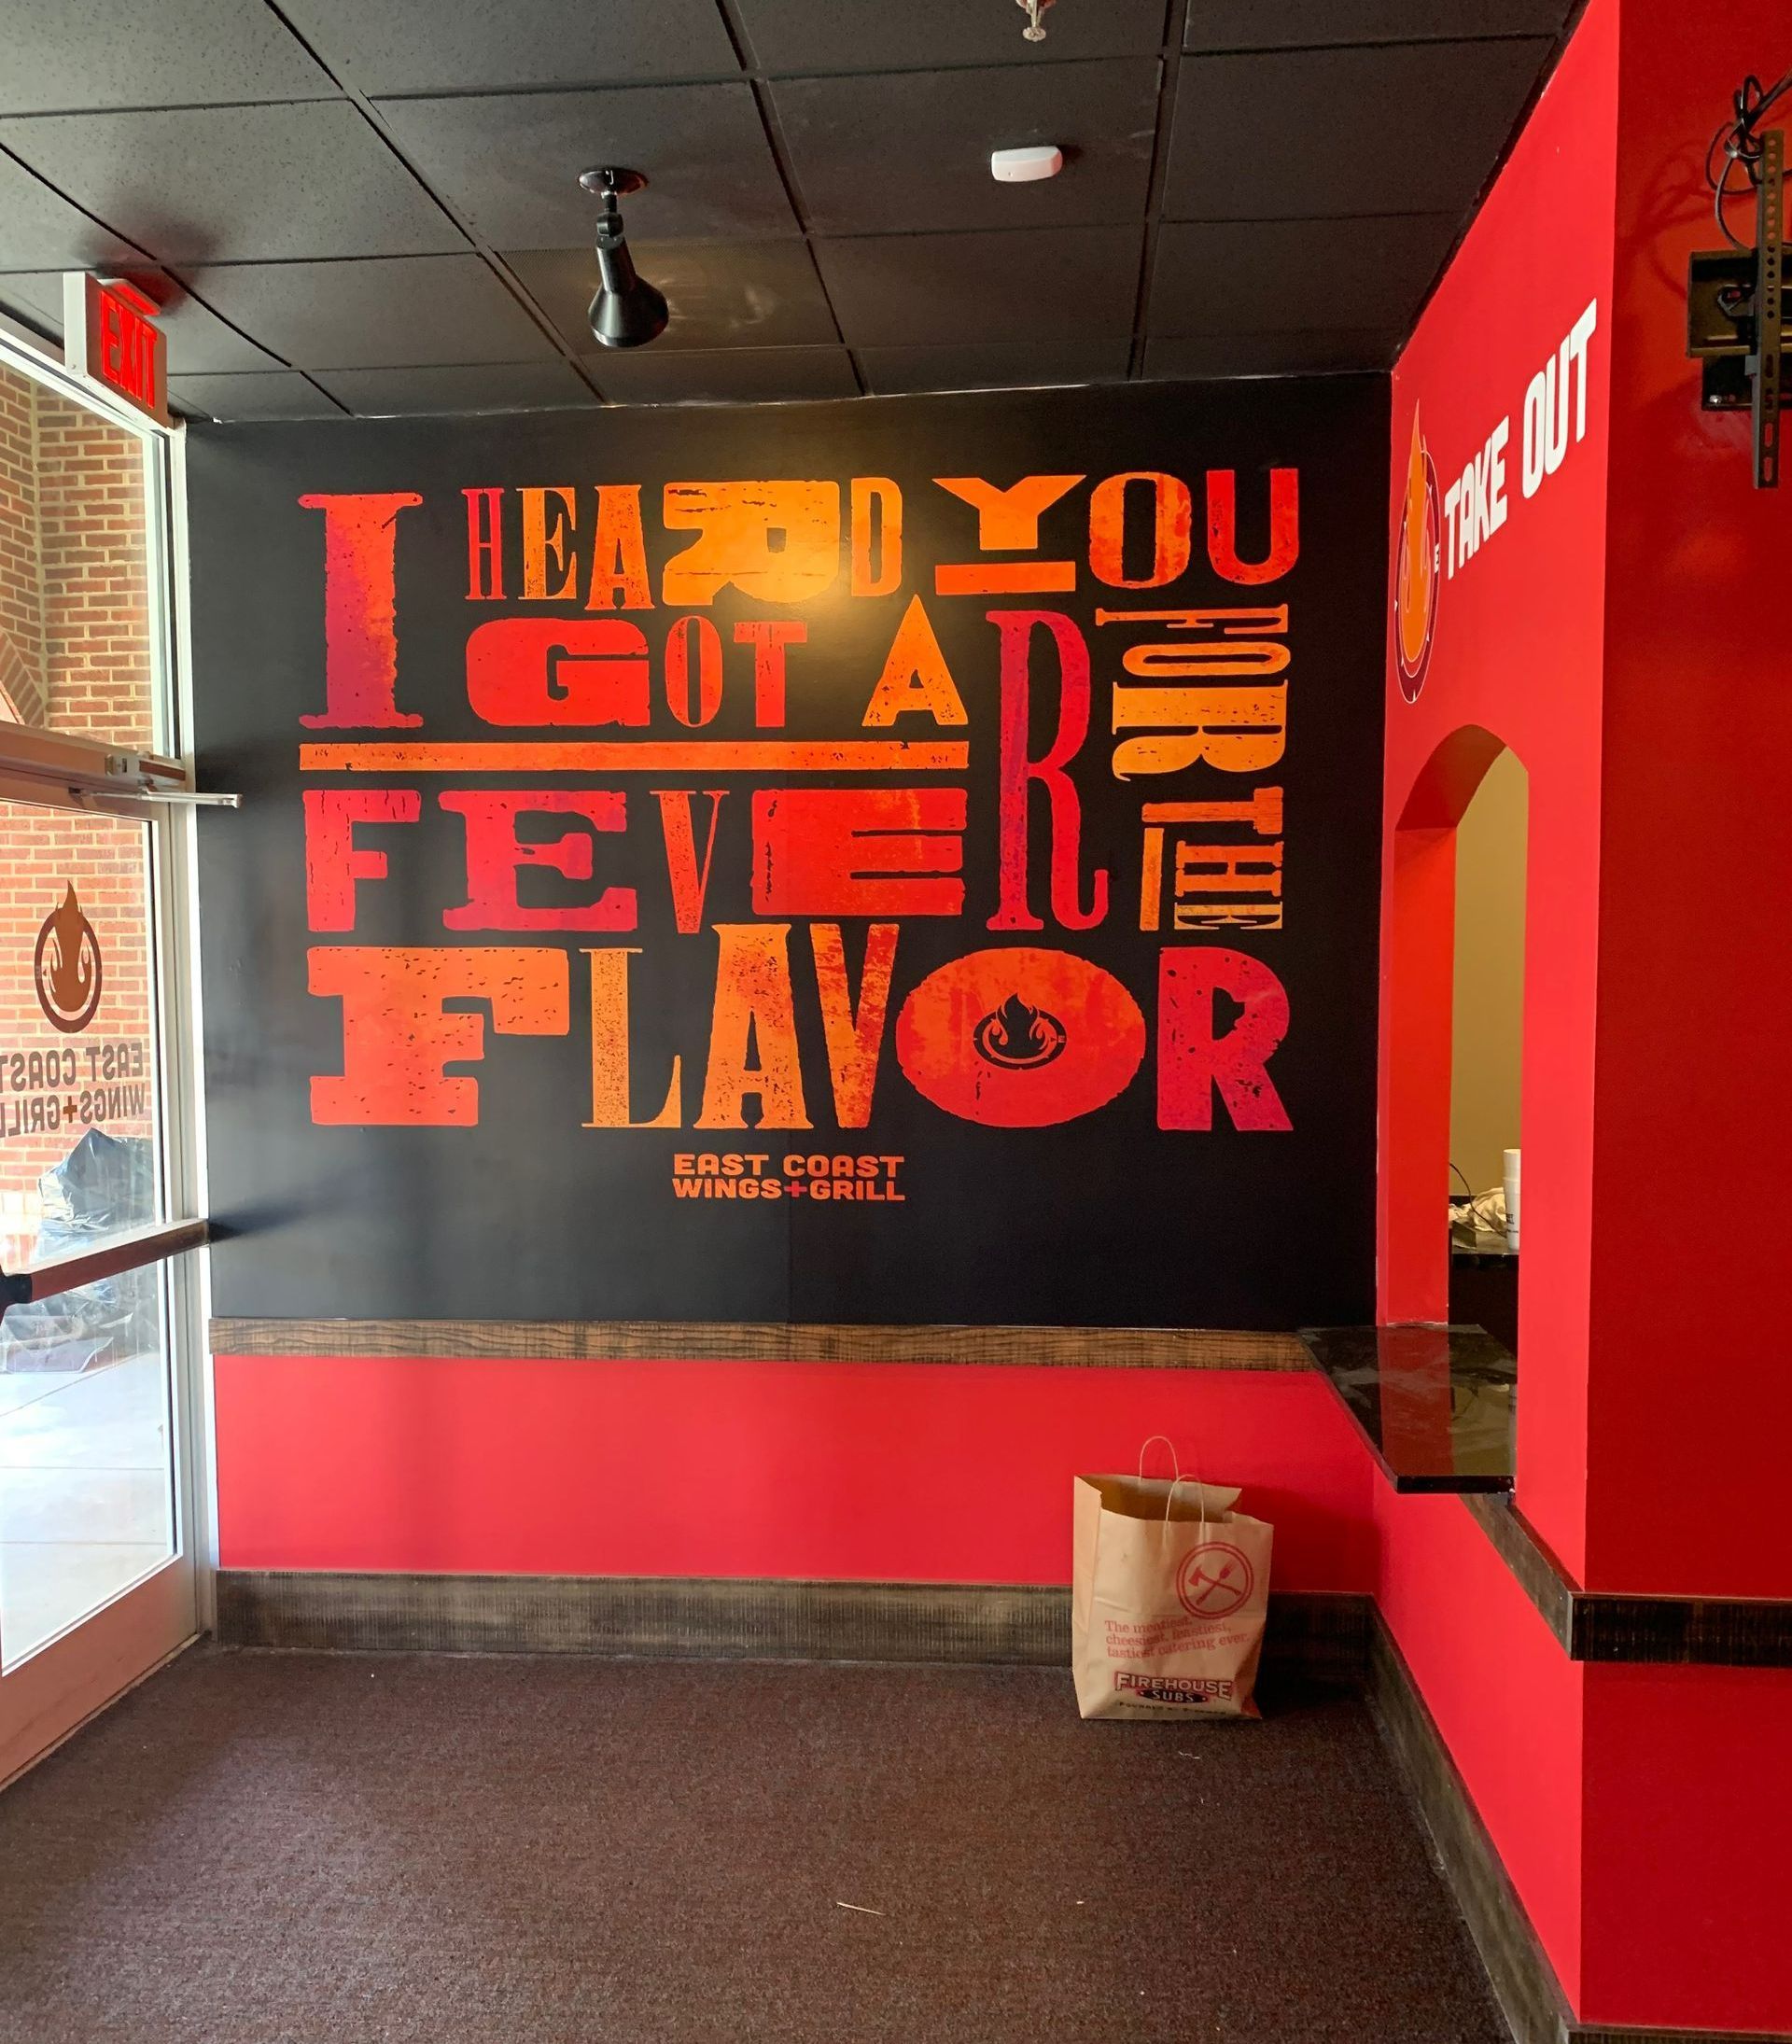 Restaurant Wall Mural Installed in Greensboro, NC